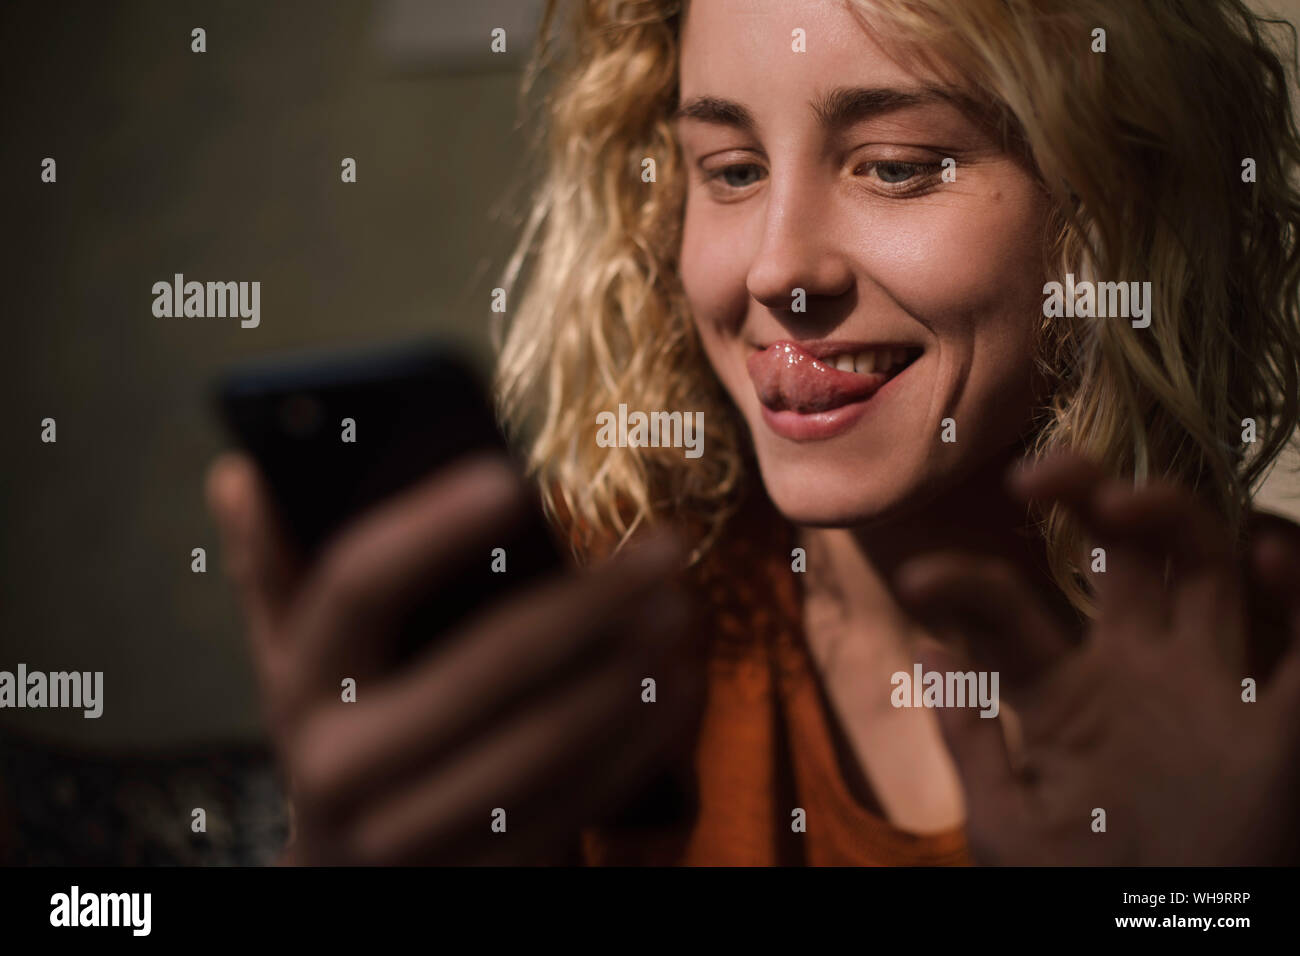 Portrait of blond young woman using cell phone for video chat Stock Photo